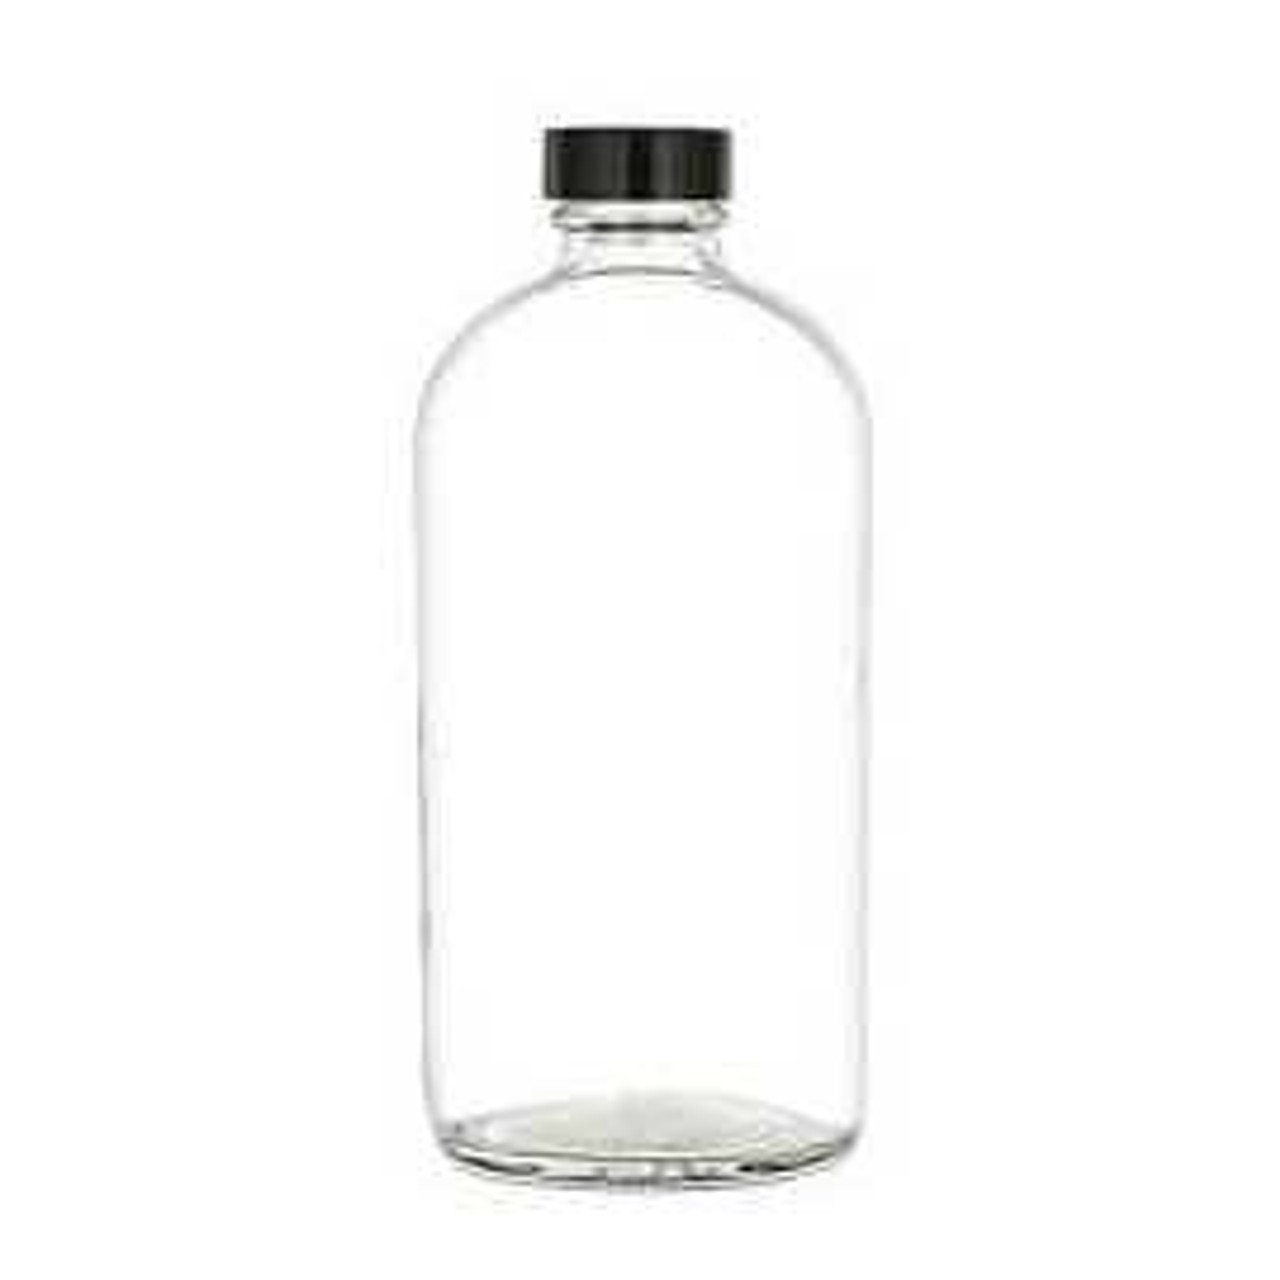 https://cdn11.bigcommerce.com/s-1ybtx/images/stencil/1280x1280/products/1046/6238/16-oz-Clear-Glass-Boston-Round-Bottle-with-Black-Cap_3153__68725.1699988666.jpg?c=2?imbypass=on